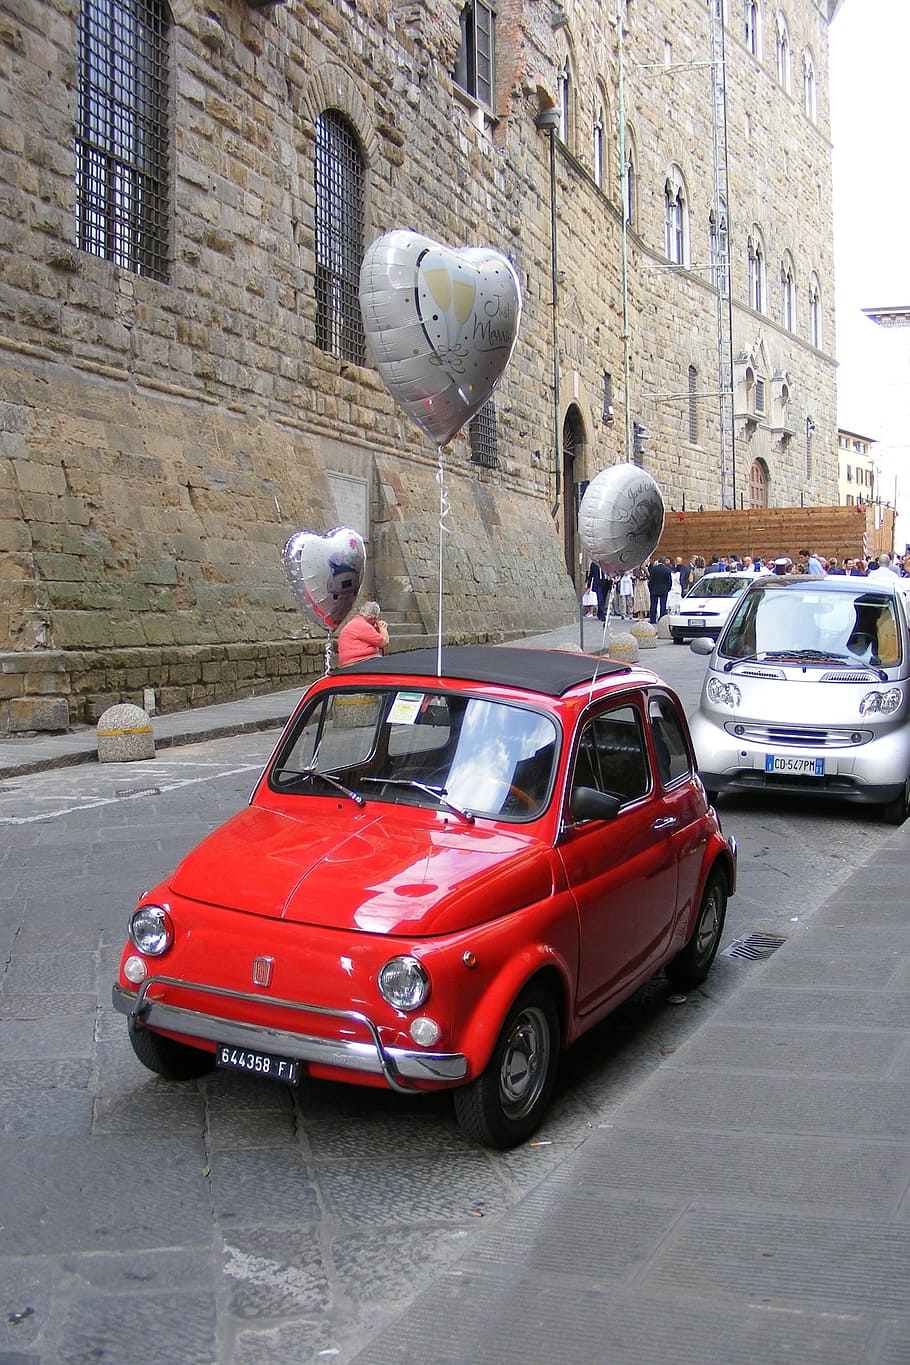 fiat, fiat 500, italy, red car, love, balloons, car, mode of transportation, motor vehicle, building exterior